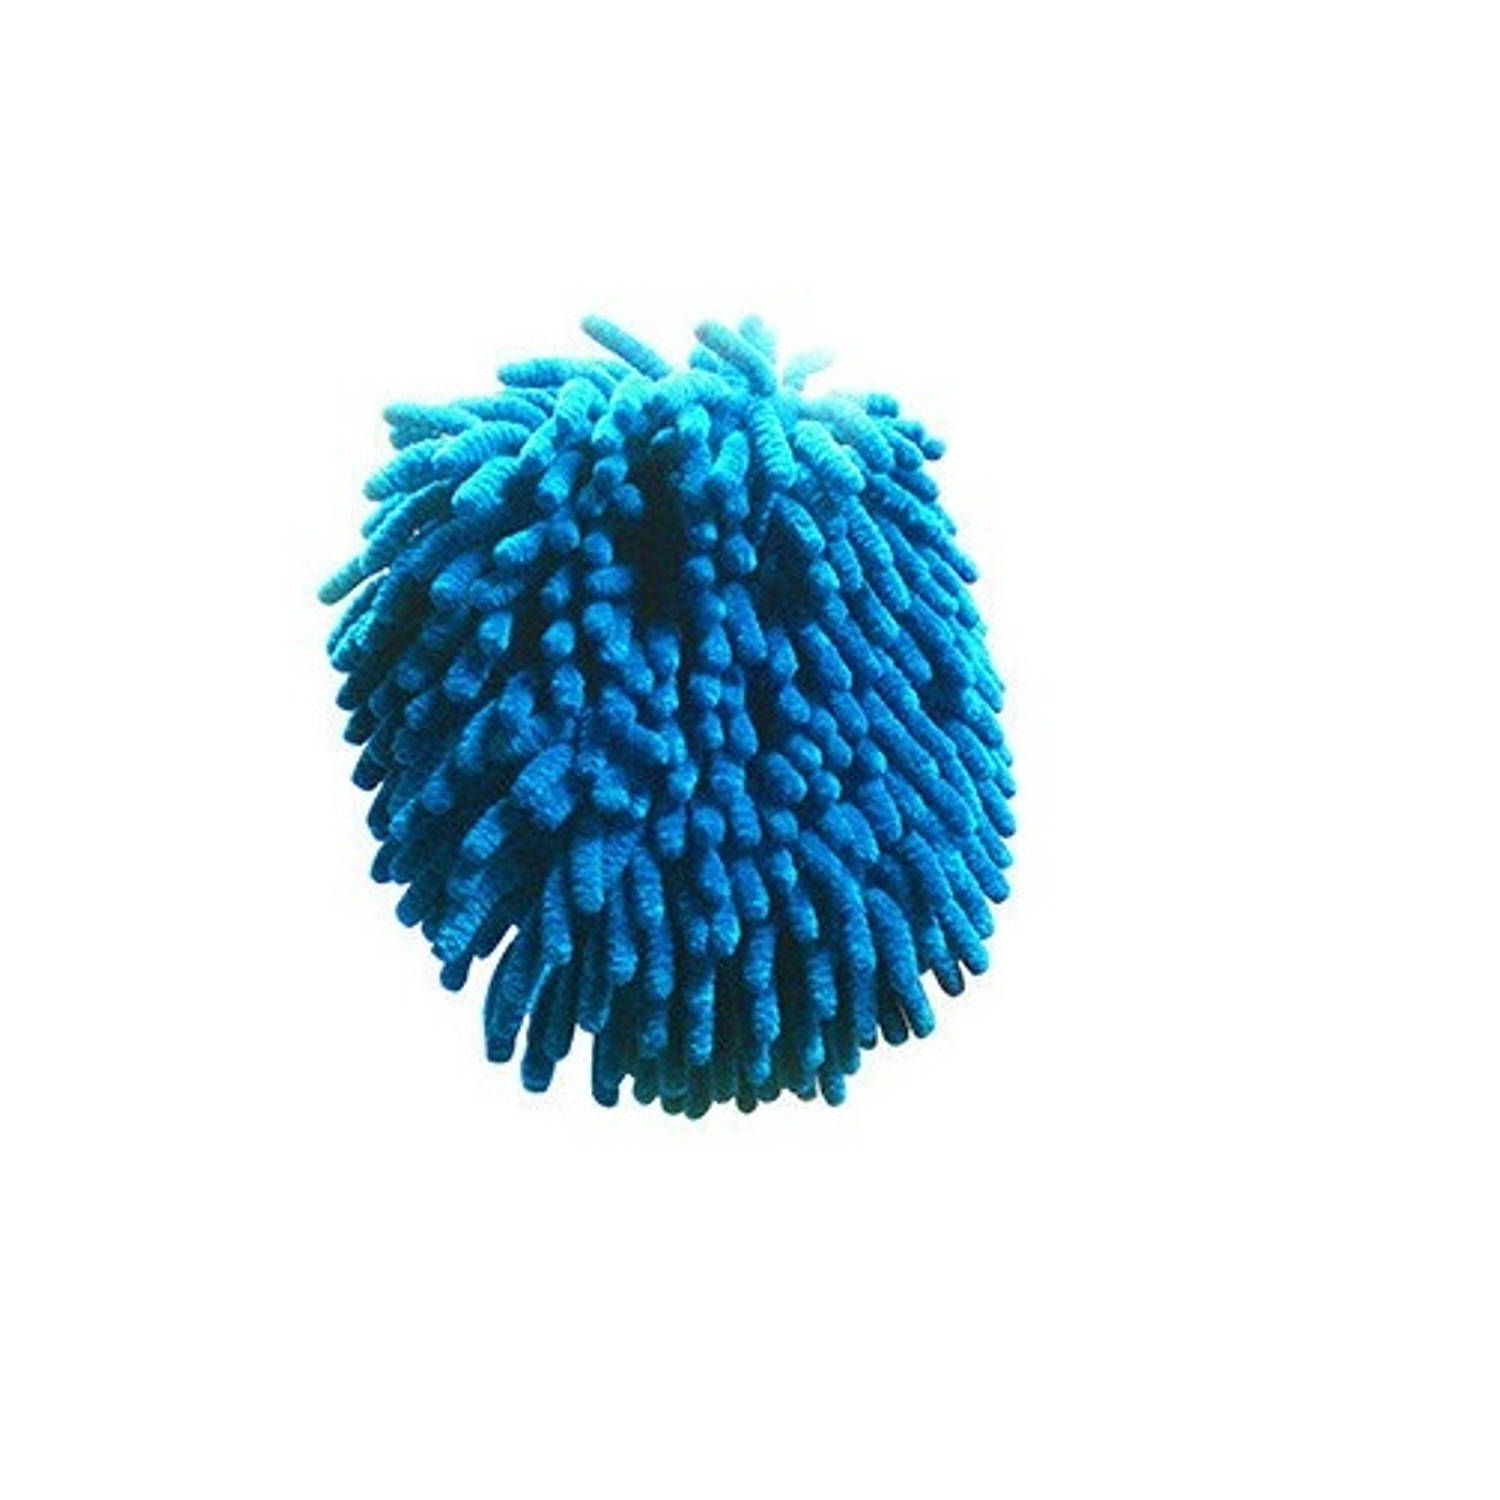 Clean-storm Spin Mop Duster